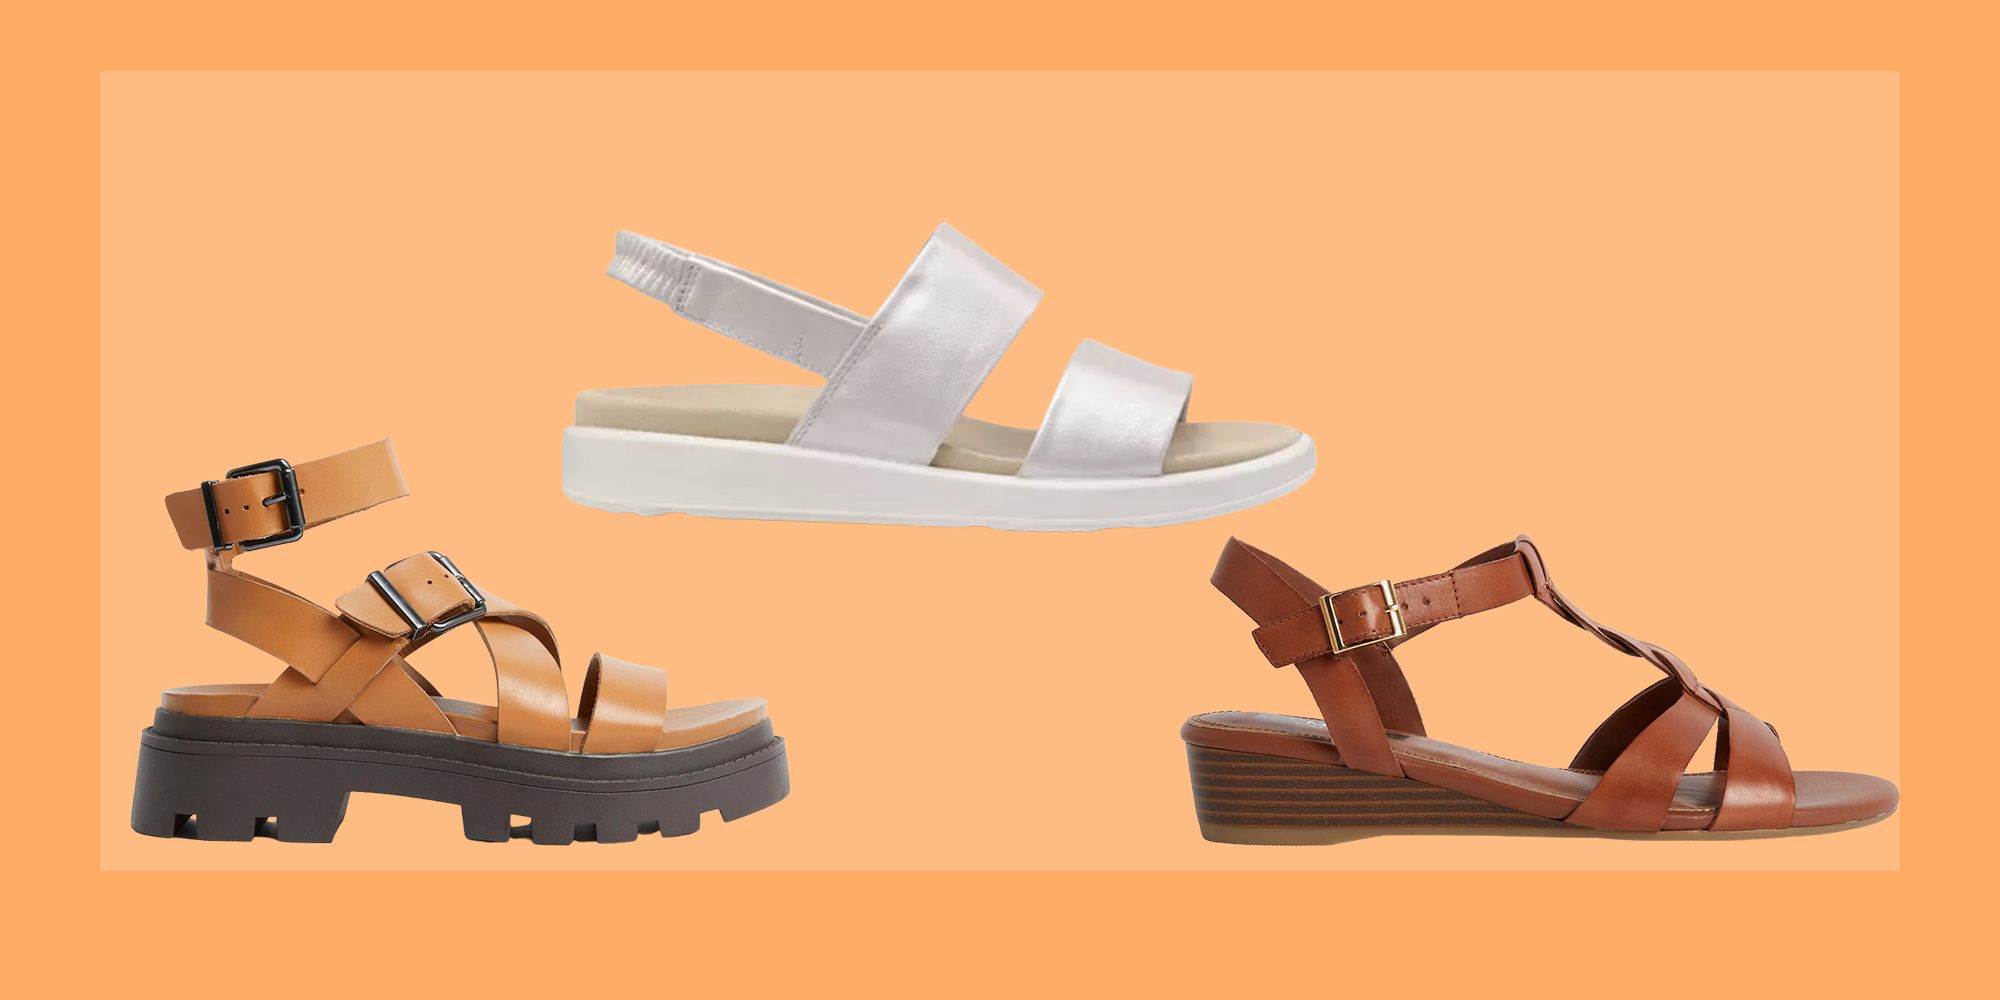 Adjustable Fit Sandal, Wide Foot, Narrow Foot, Light Brown Sandals, Sandals  With Buckle, Women Sandals, Summer Shoes, Leather Sandals 